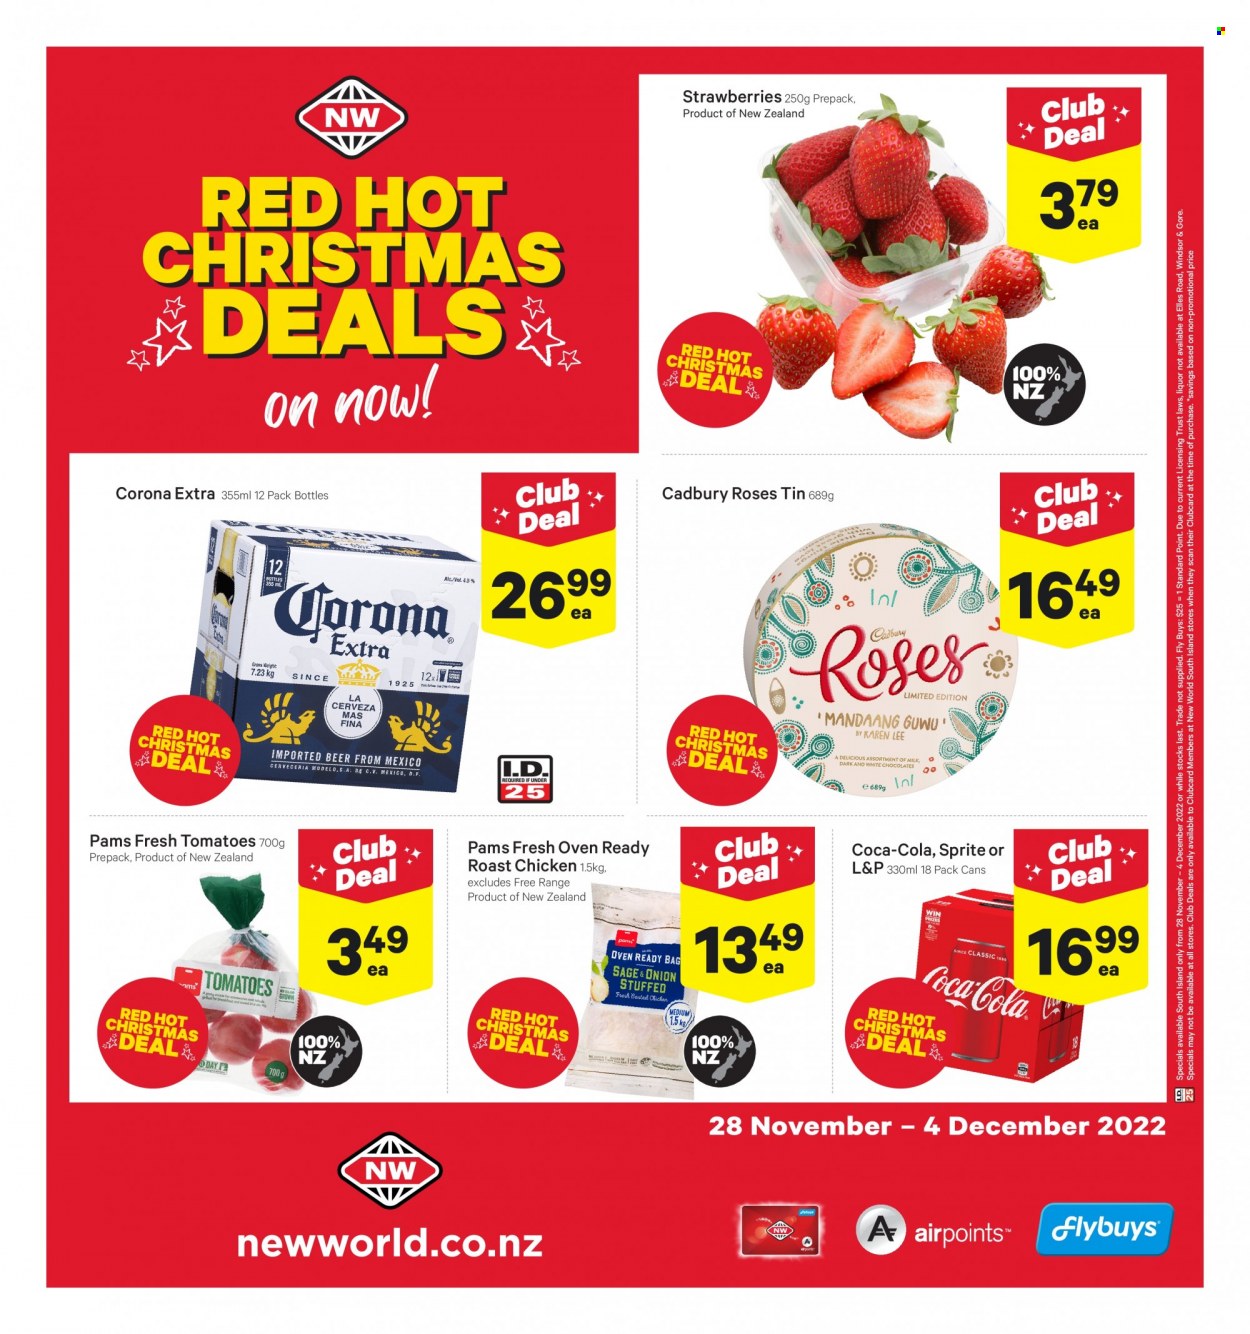 thumbnail - New World mailer - 28.11.2022 - 04.12.2022 - Sales products - tomatoes, strawberries, chicken roast, Cadbury, Cadbury Roses, Coca-Cola, Sprite, L&P, beer, Corona Extra. Page 2.